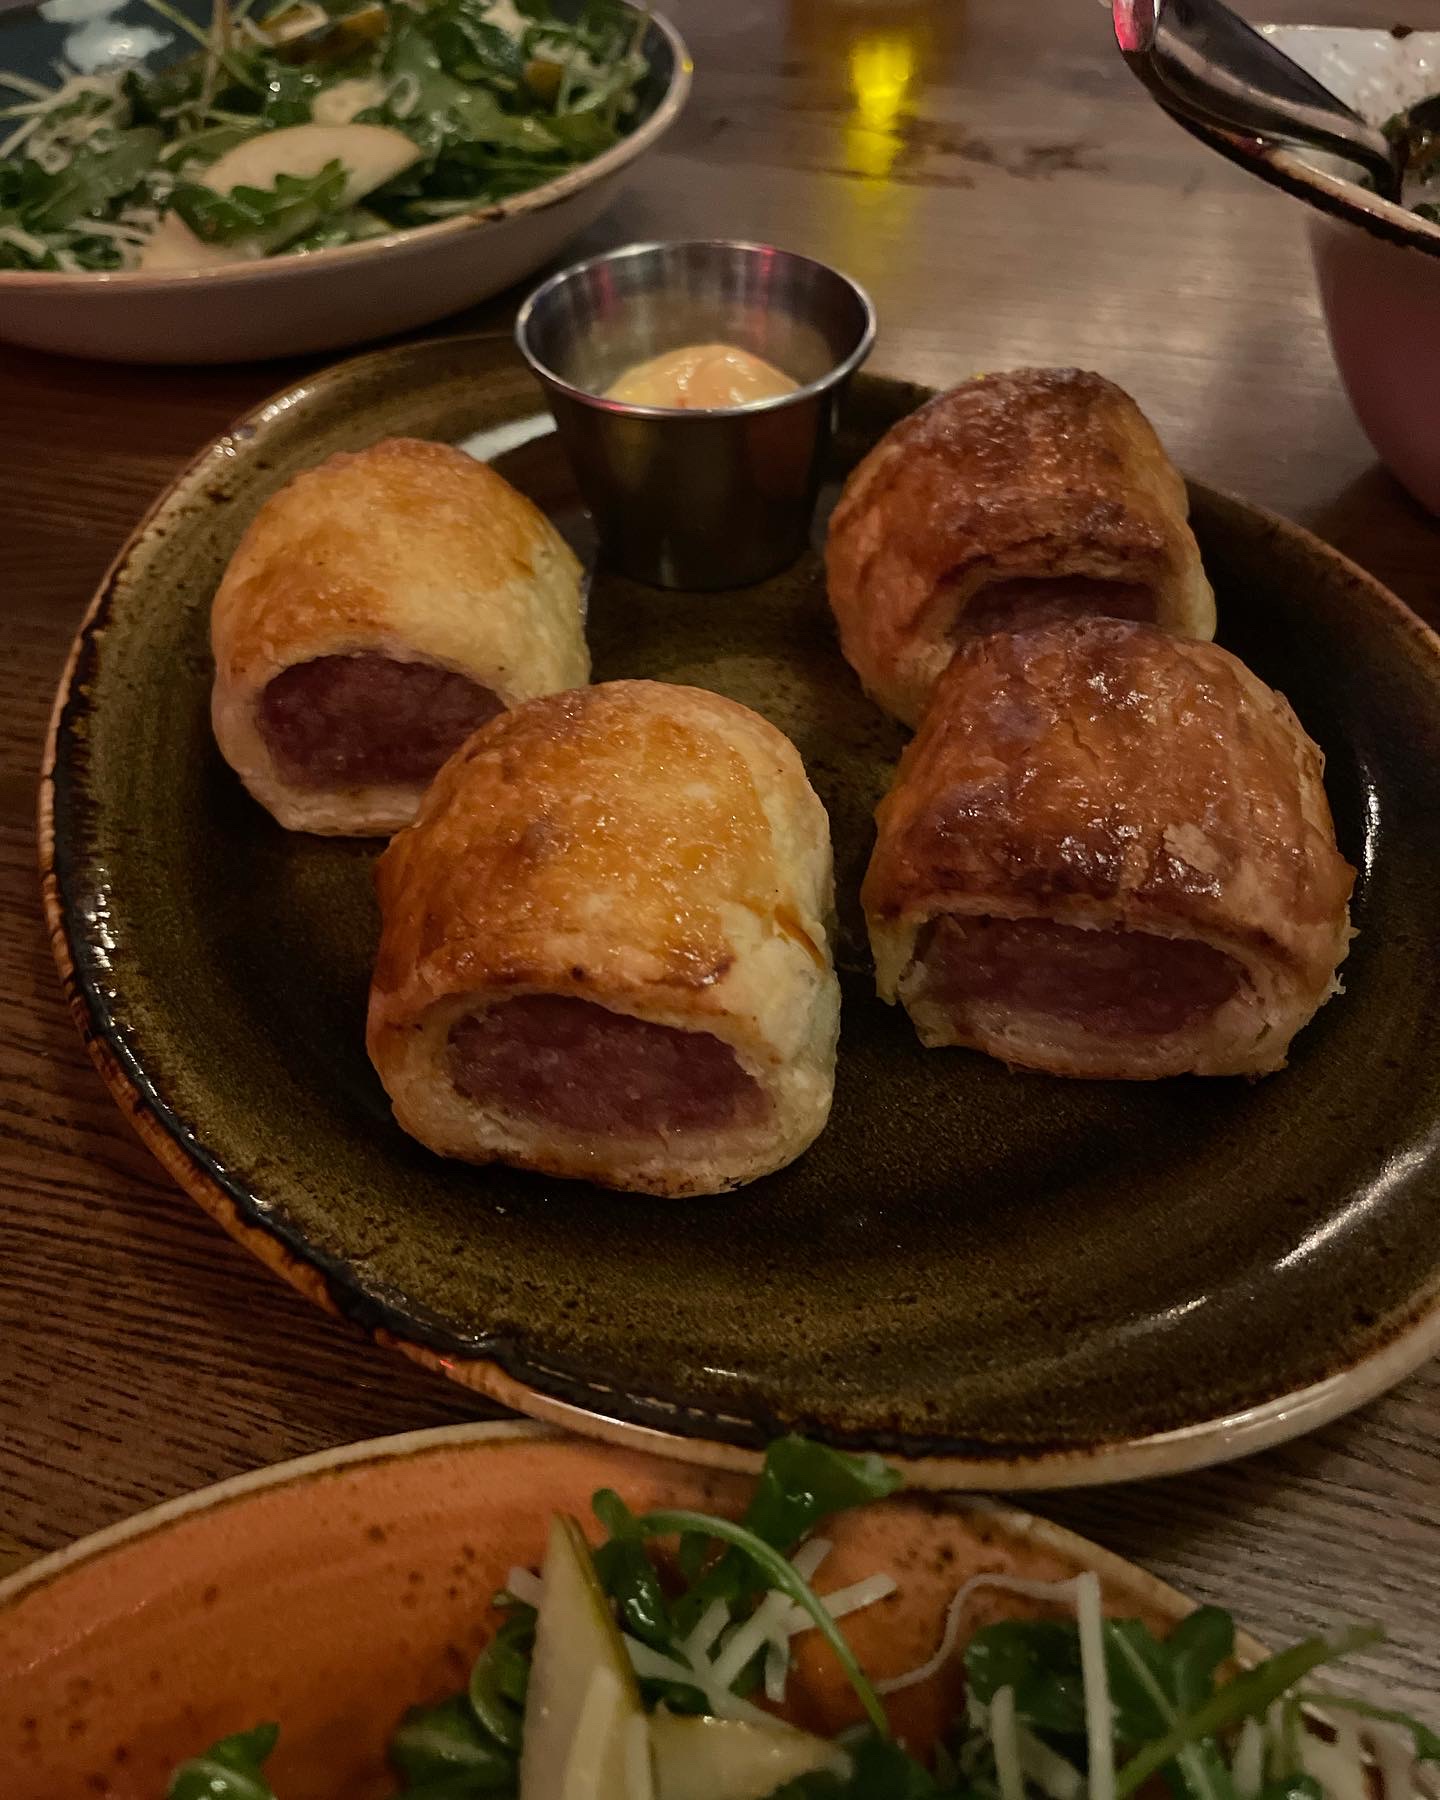 Sausages in a blanket.